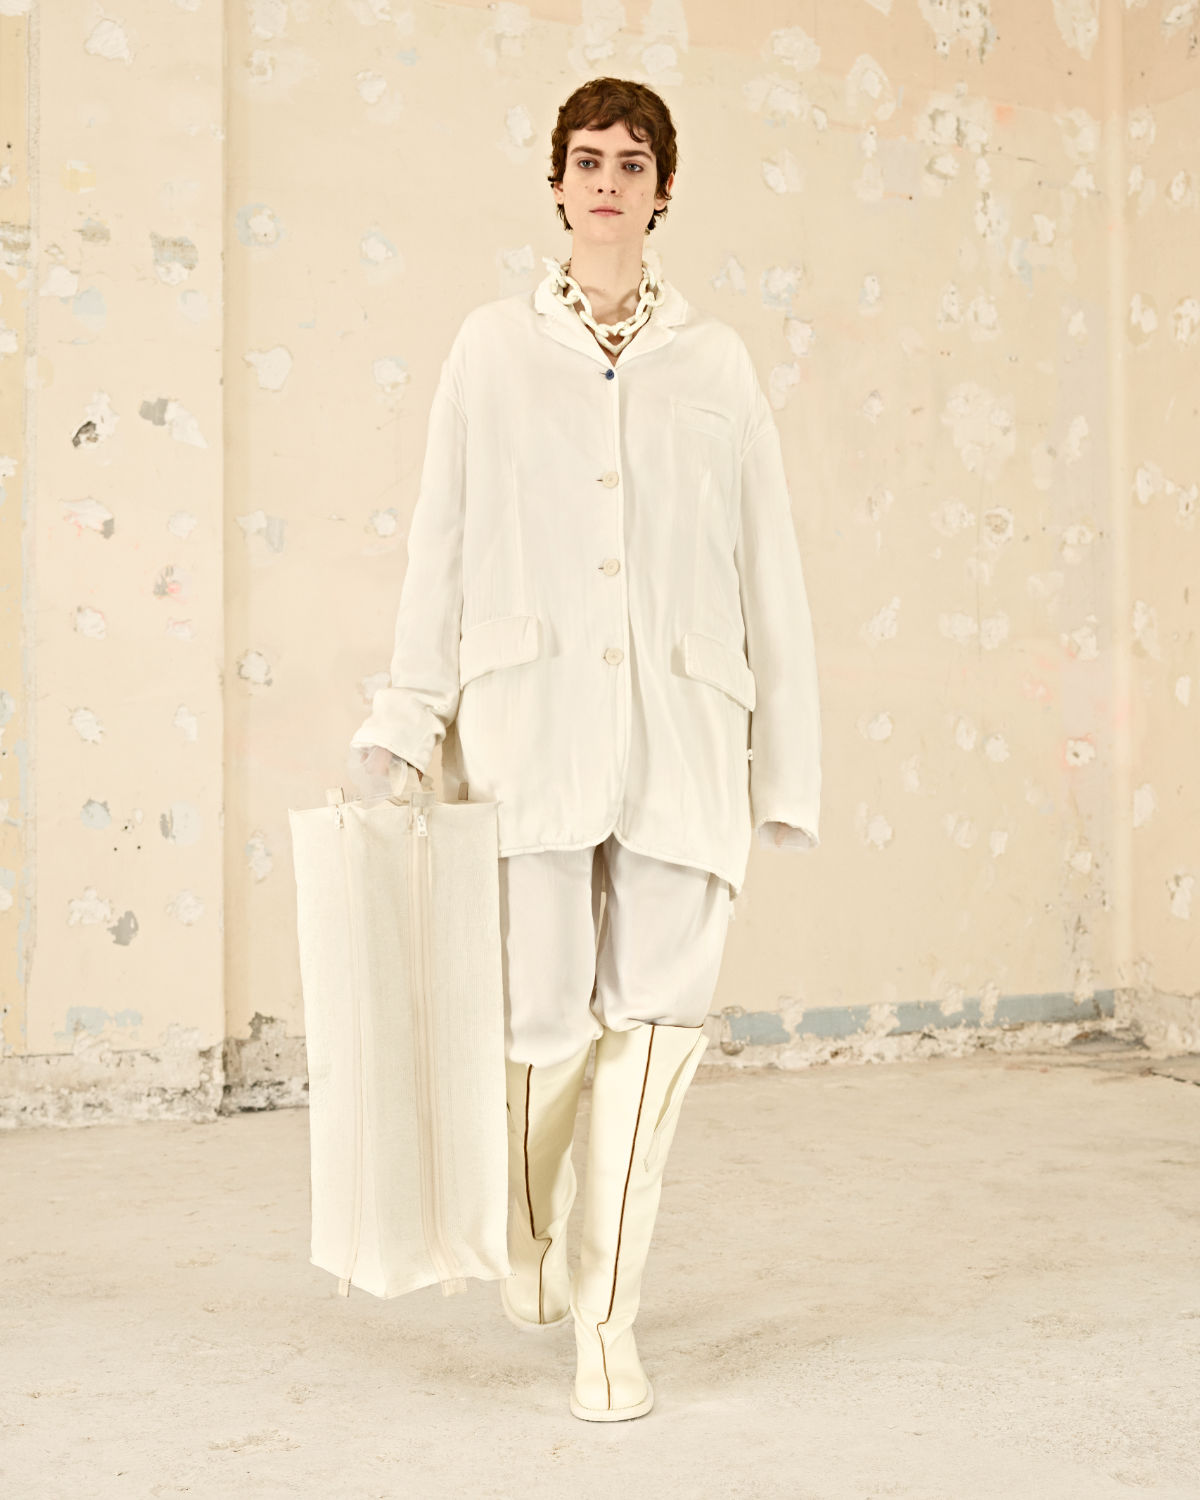 Acne Studios Presents Its Sensational Women’s Fall/Winter 2021 Collection